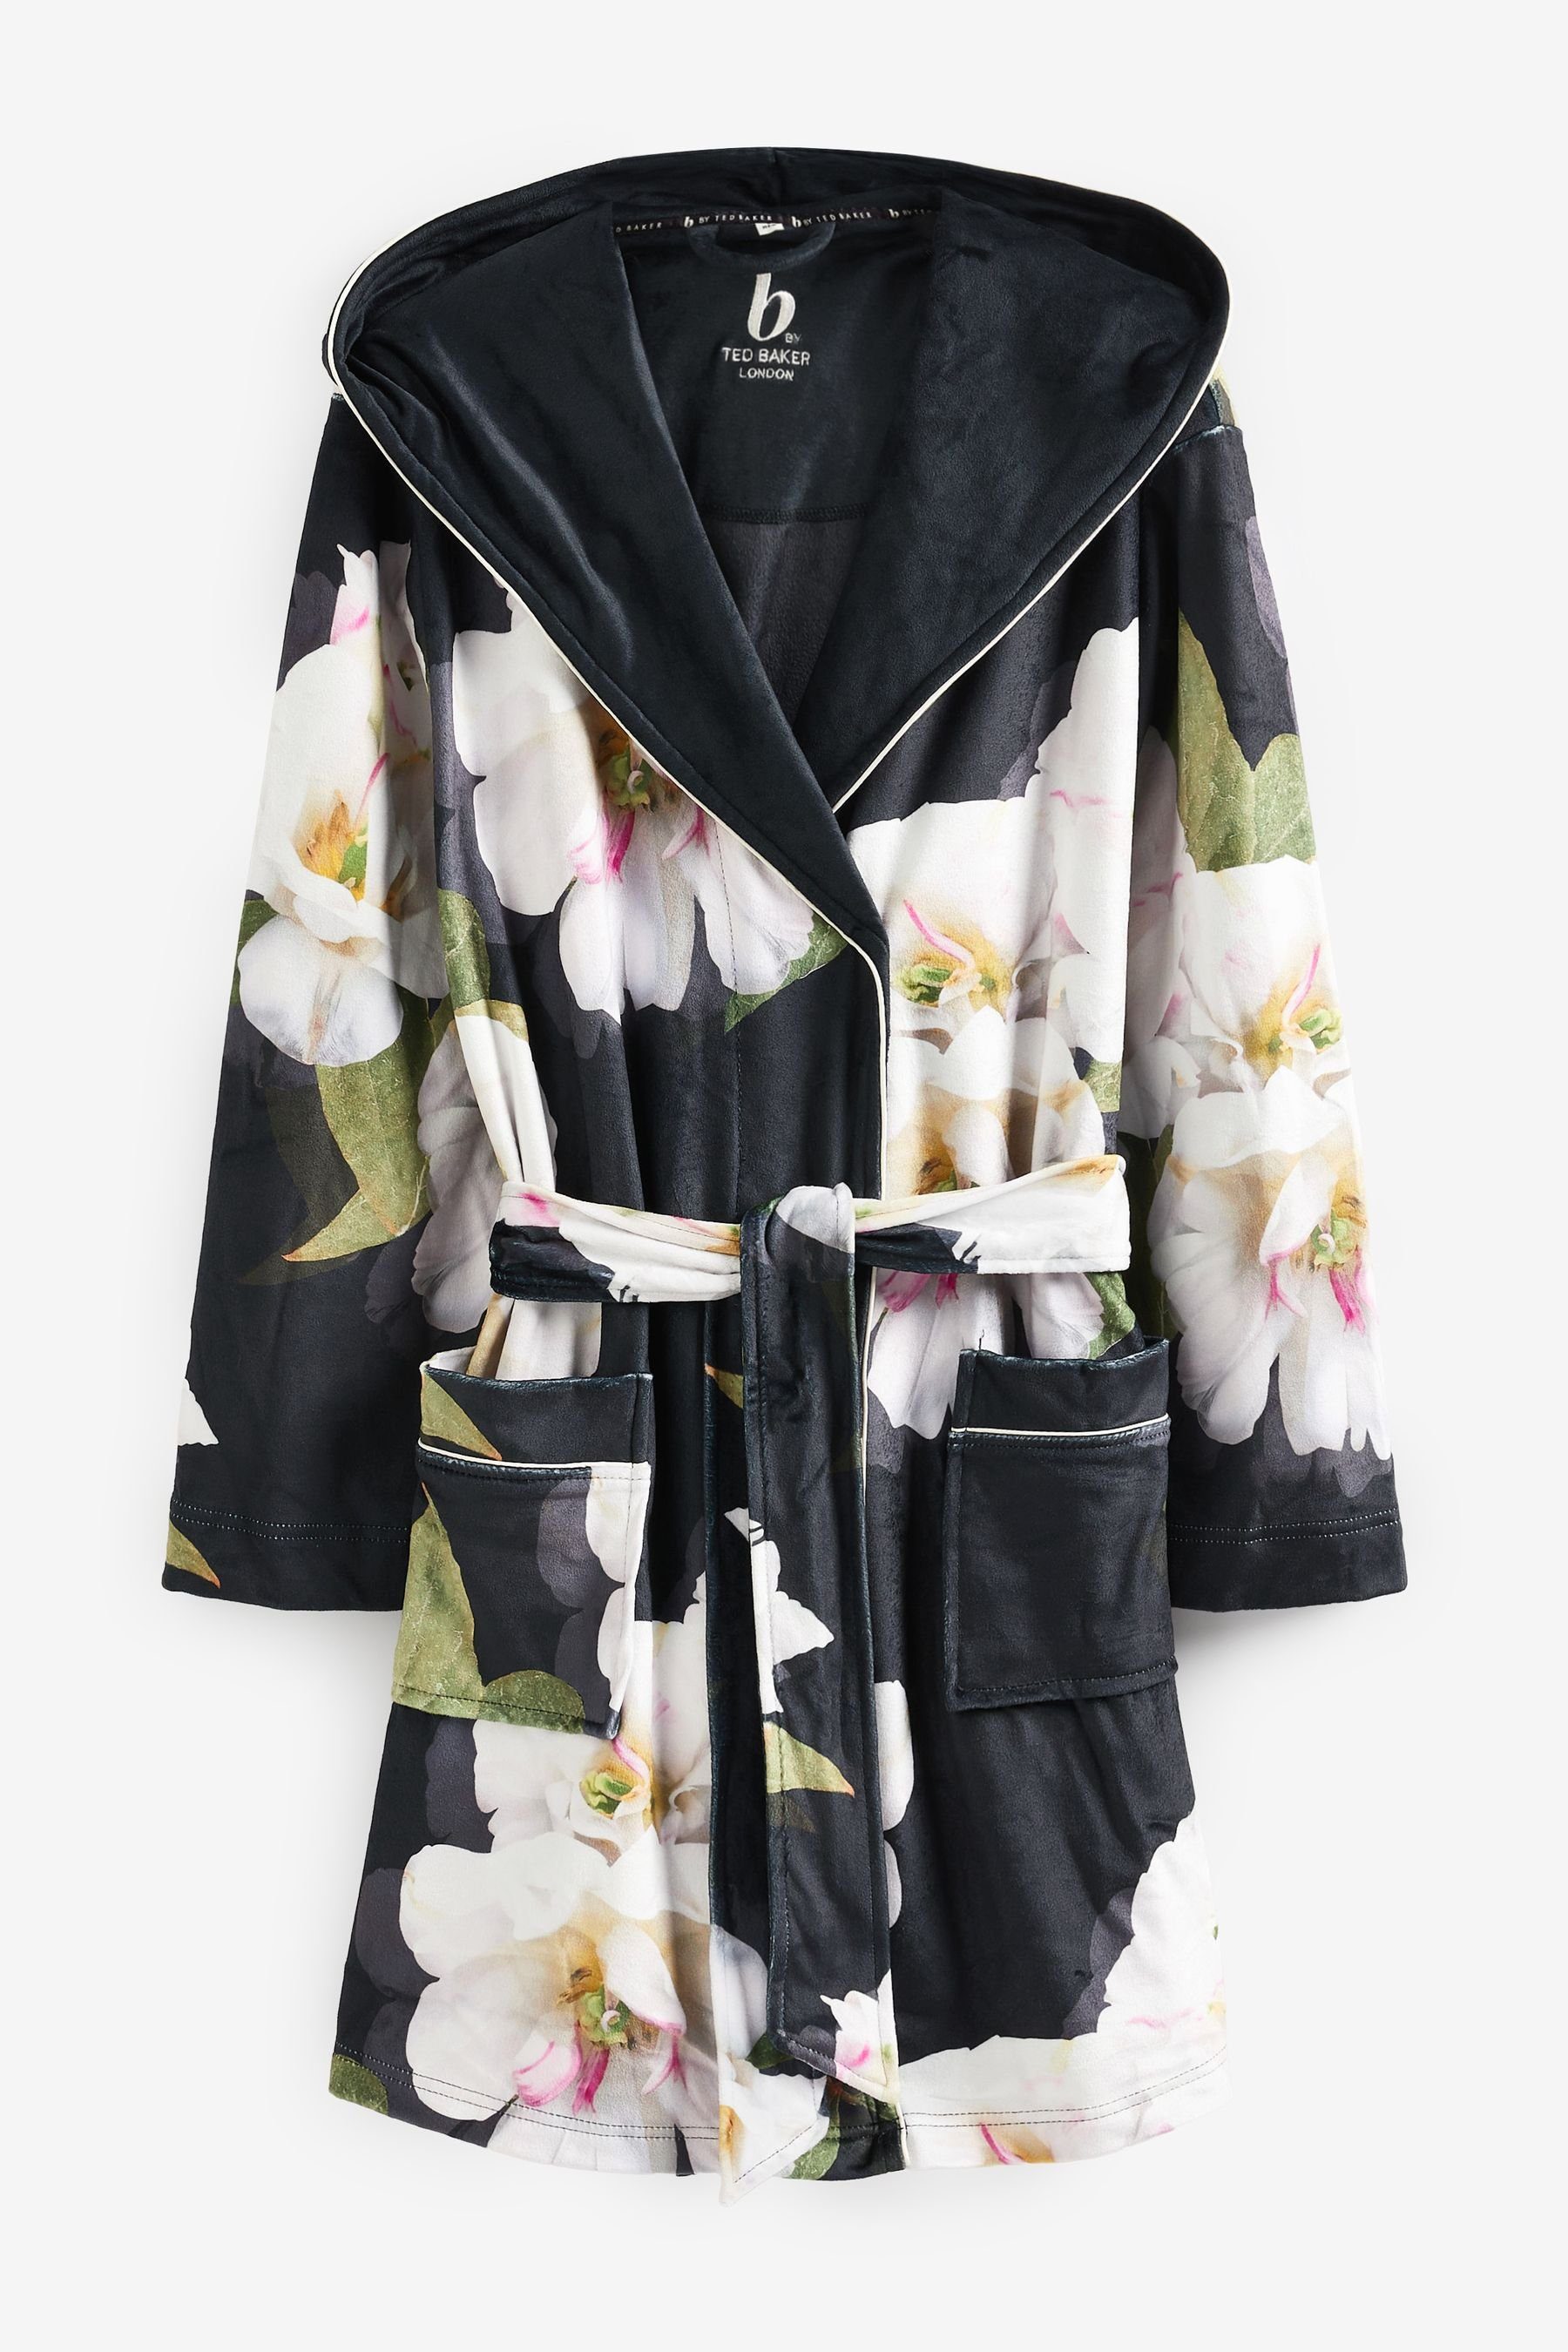 B by Ted Baker Damenbademantel Baker Charcoal B Polyester, Elasthan Floral Bademantel, Ted by Grey